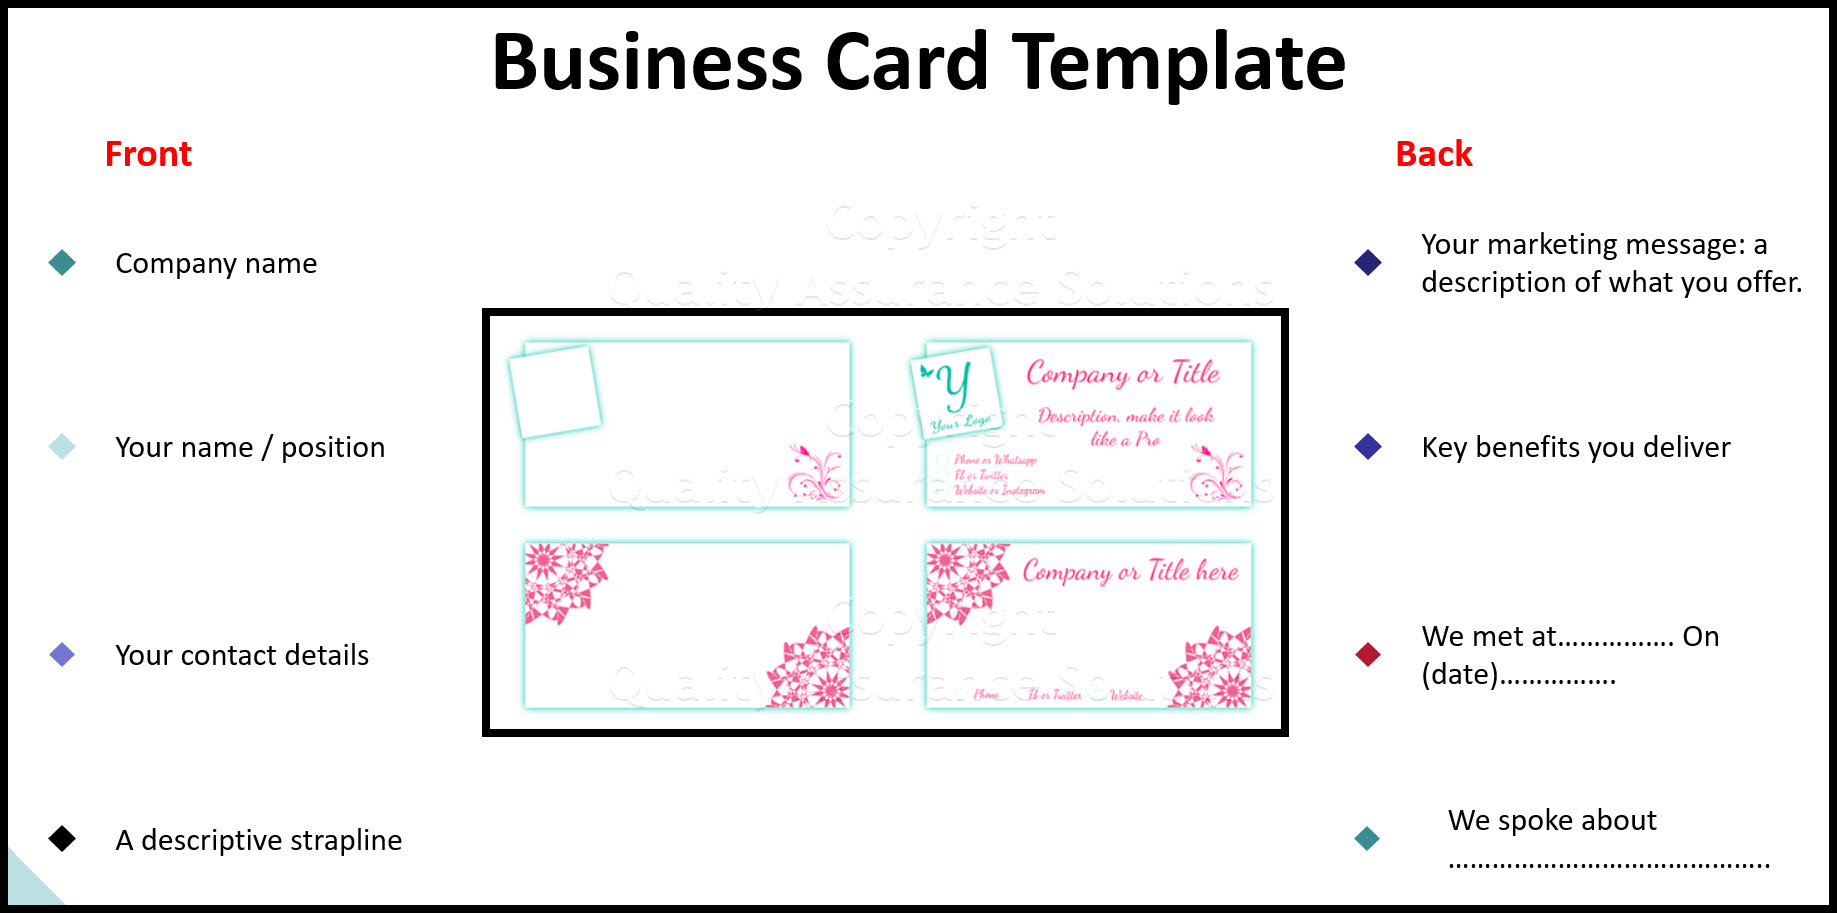 When creating your business card template, think about the content. Make it work for your marketing needs...